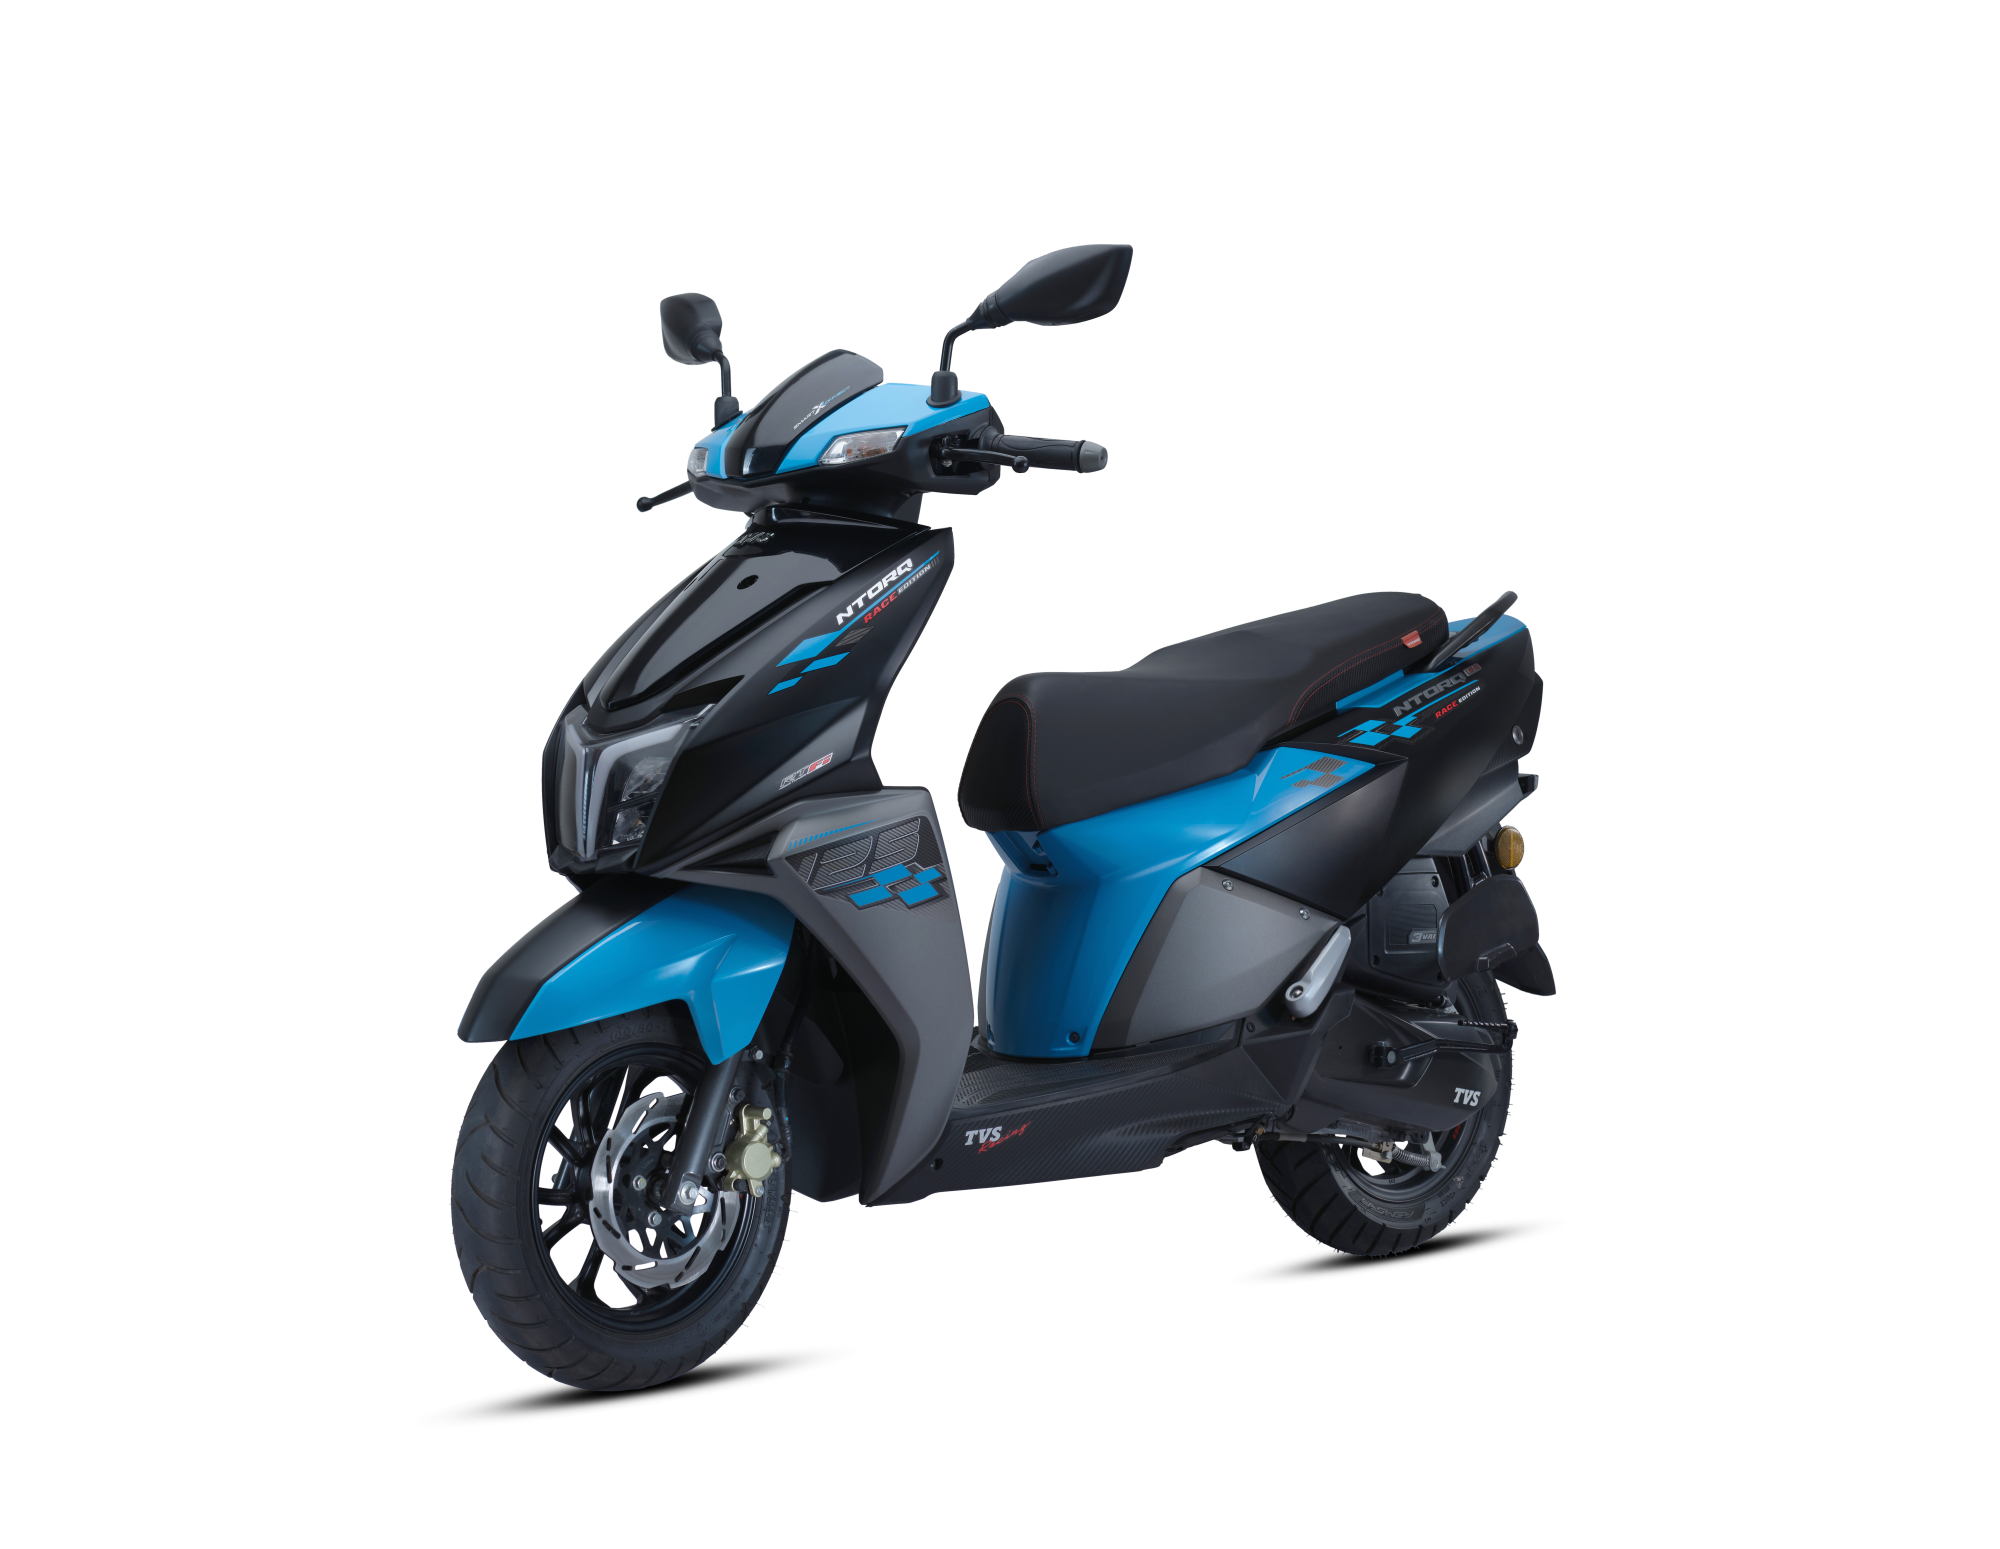 TVS Motor Company launches Youthful Marine Blue Colour for TVS NTORQ 125 Race Edition